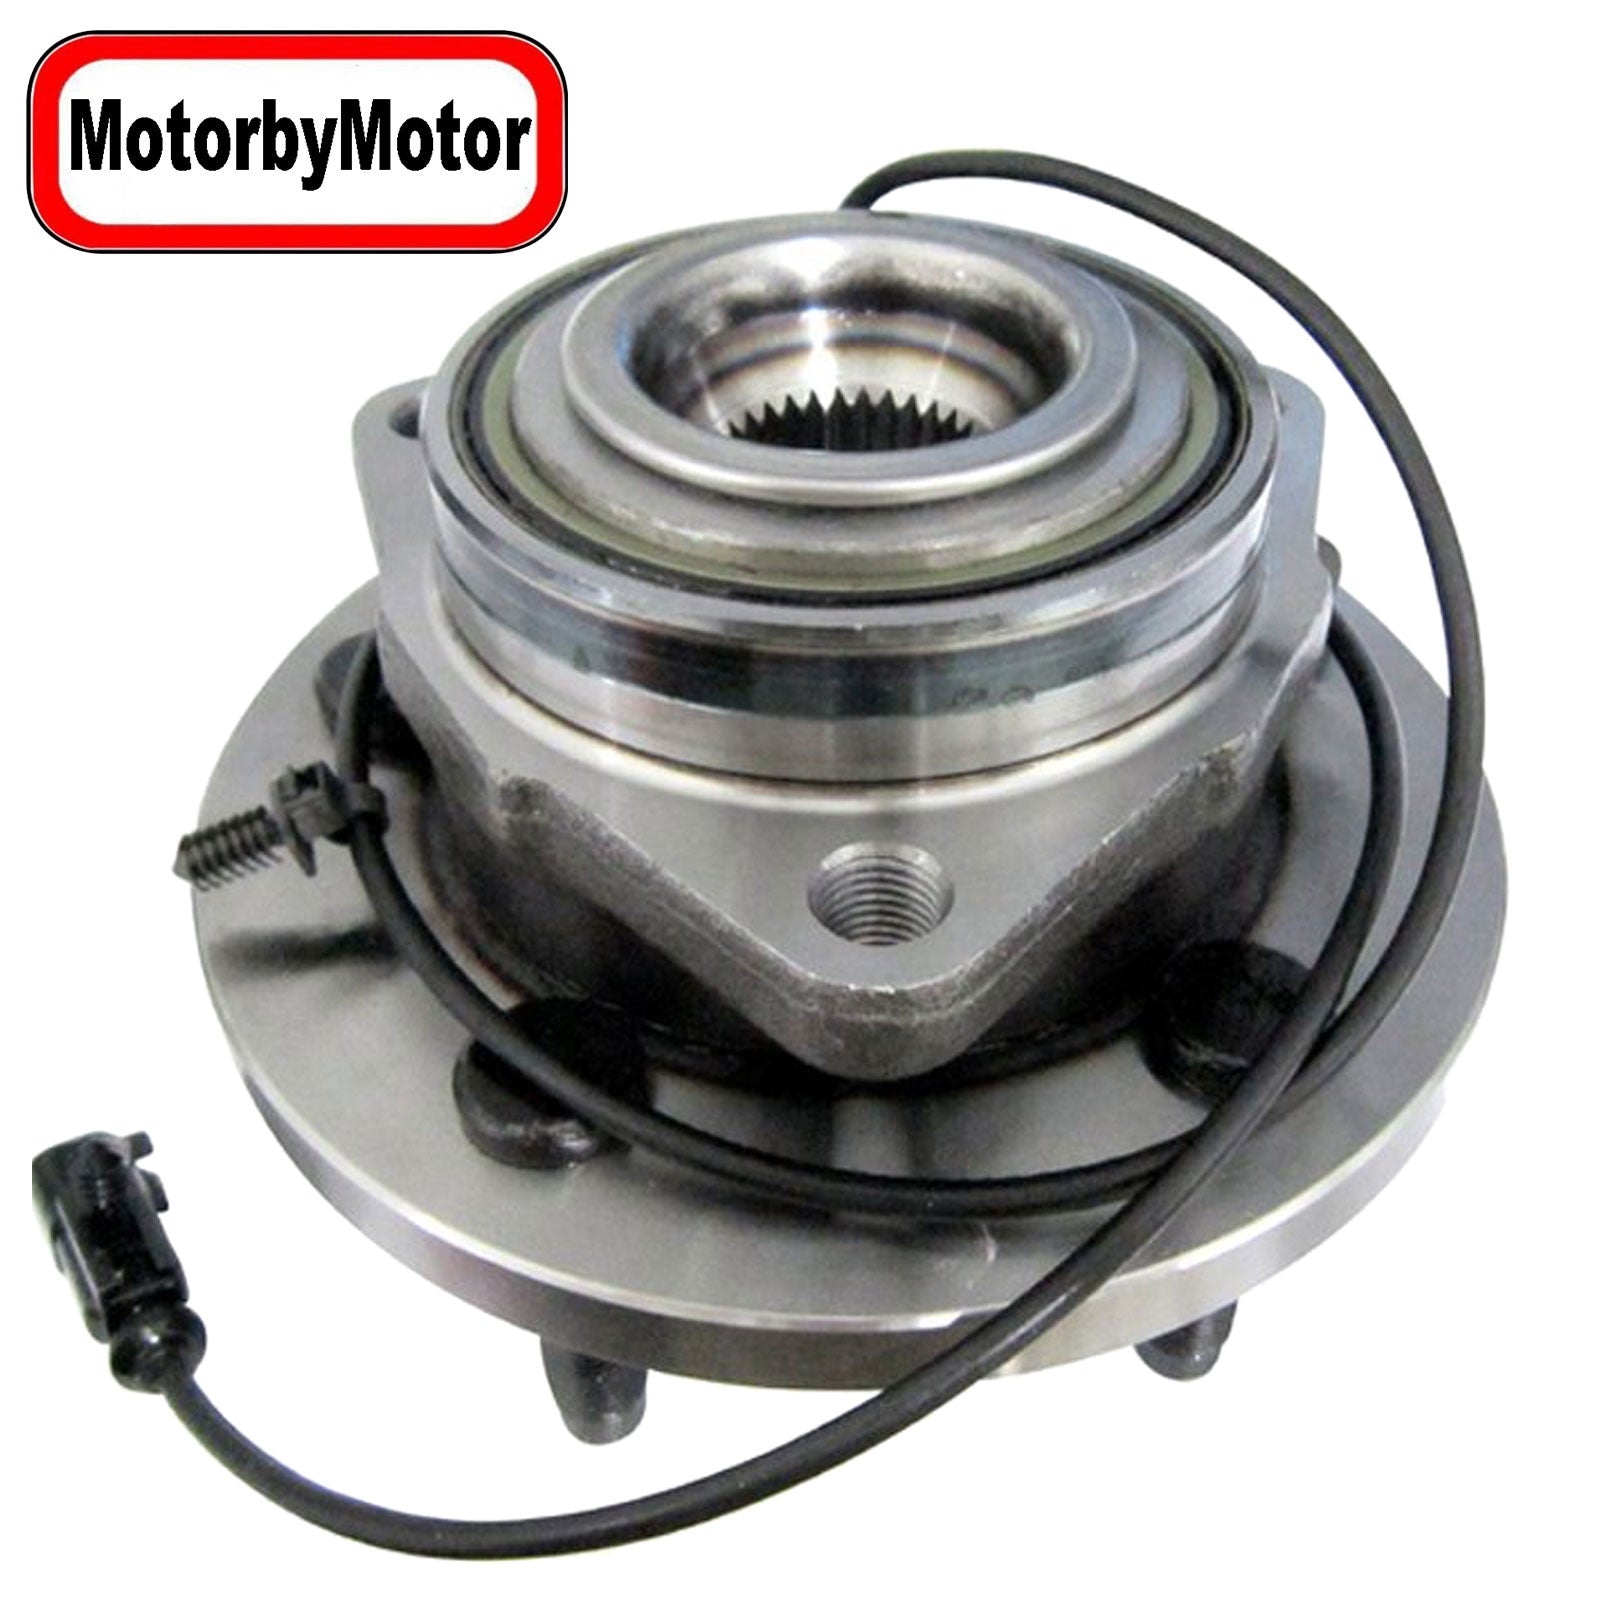 MotorbyMotor 513271 Front Wheel Bearing and Hub Assembly with 5 Lugs fits for Chrysler Aspen,Dodge Durango Low-Runout OE Directly Replacement Hub Bearing w/ABS, 2WD 4WD MotorbyMotor